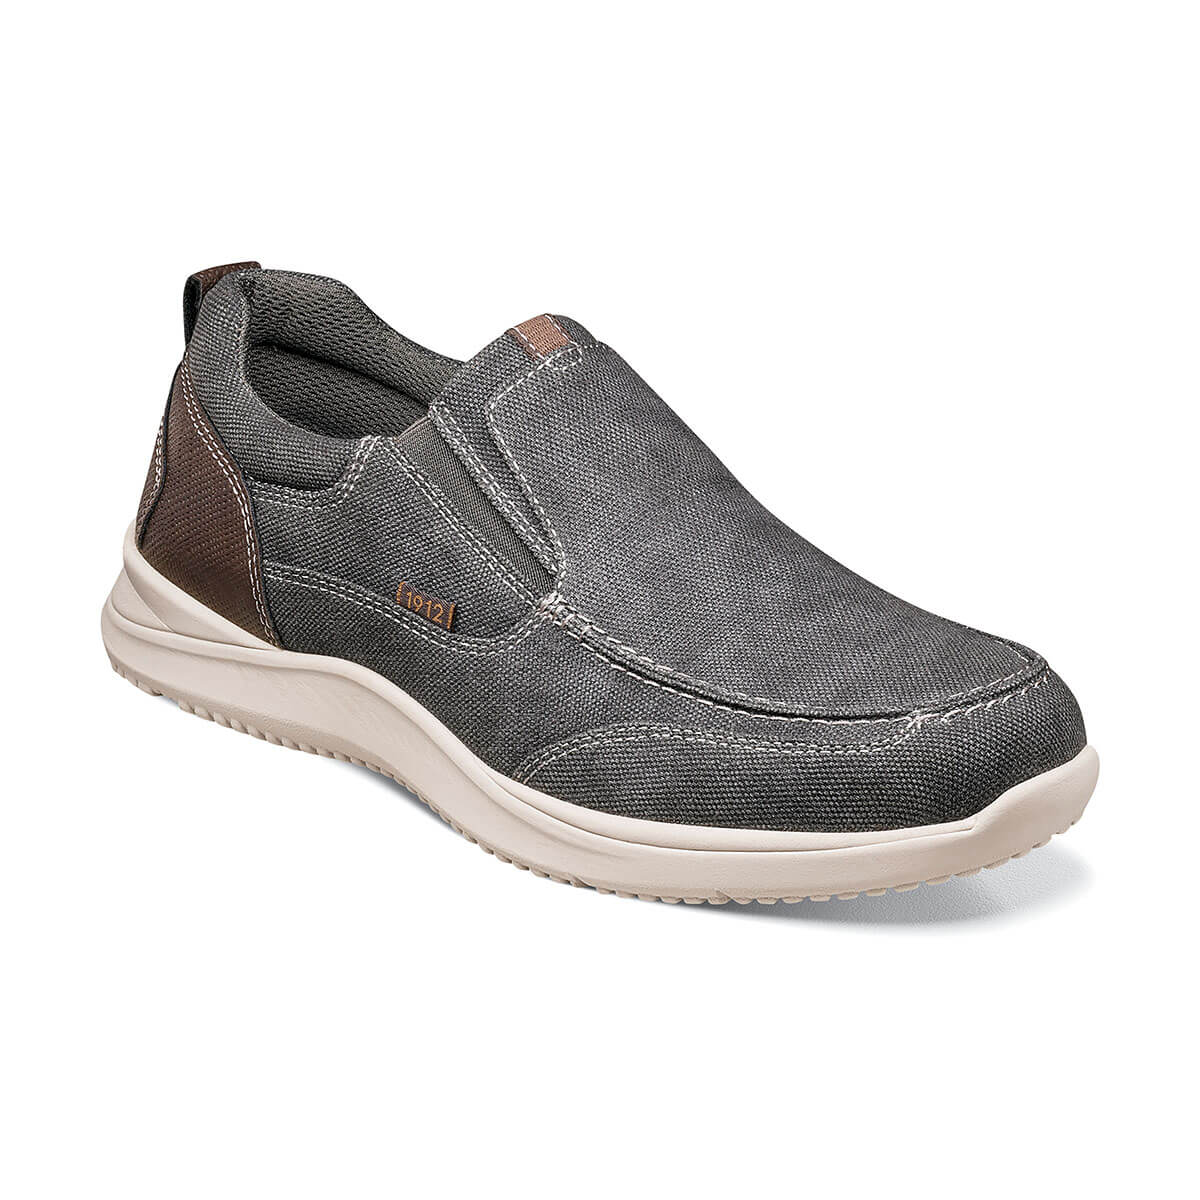 Conway Canvas Moc Toe Slip On